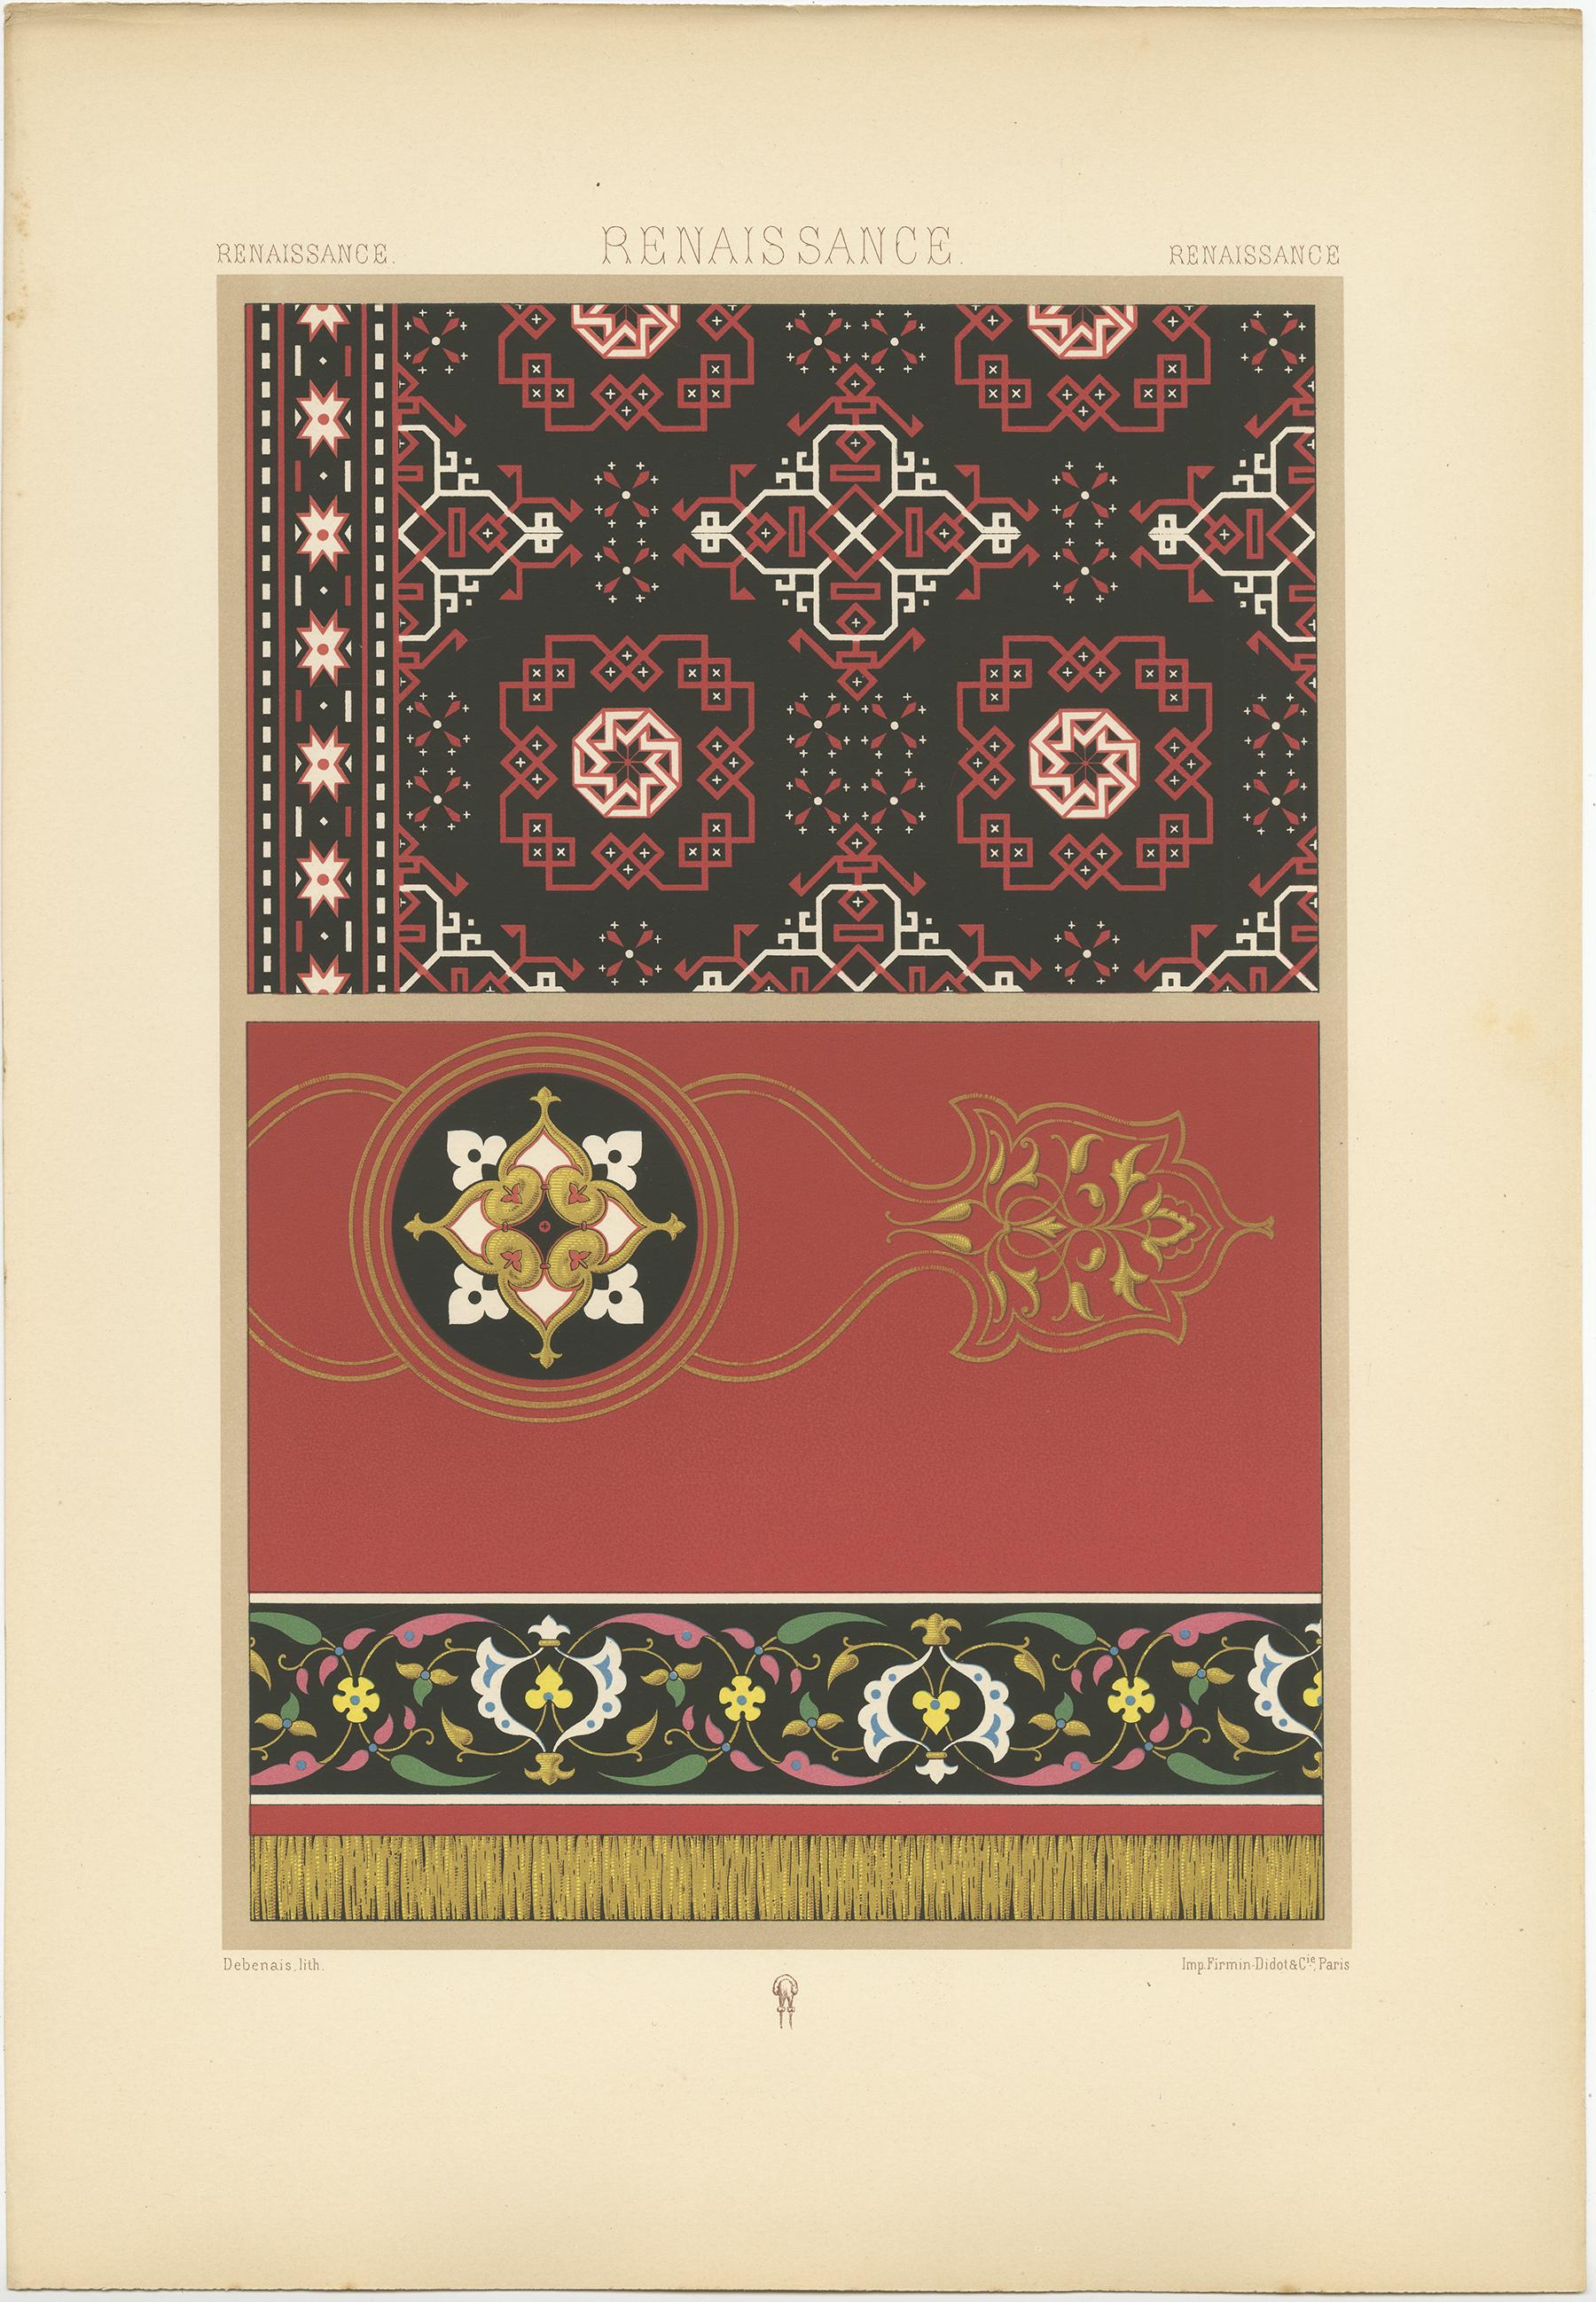 Antique print titled 'Renaissance - Renaissance - Renaissance'. Chromolithograph of carpet designs of Near Eastern style from 15th century paintings ornaments. This print originates from 'l'Ornement Polychrome' by Auguste Racinet. Published circa